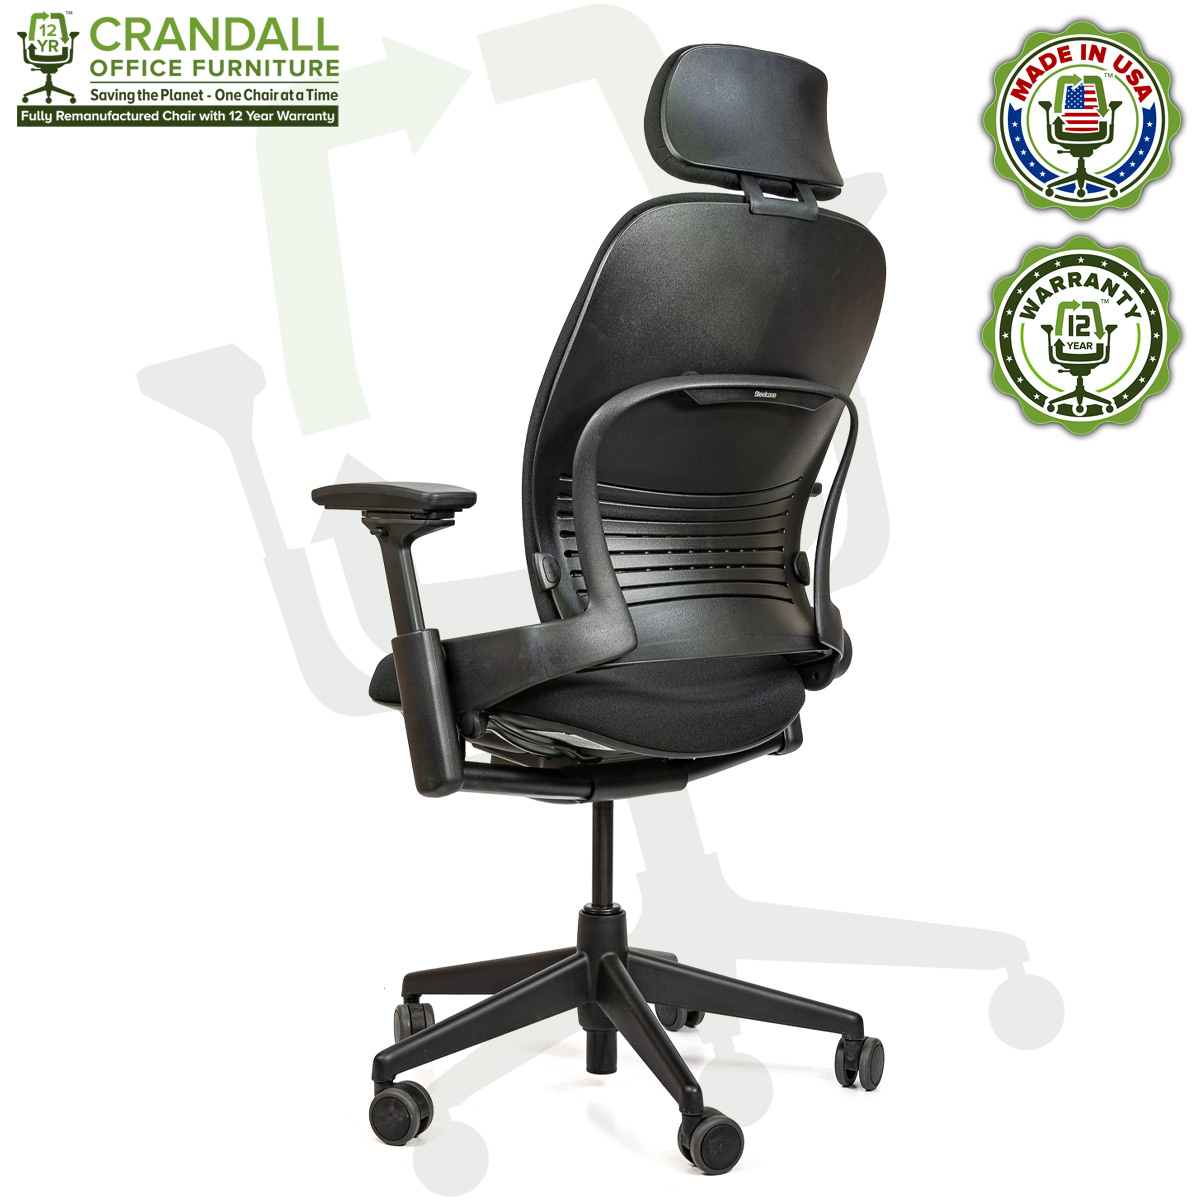 Crandall Office Furniture Remanufactured Steelcase V2 Leap Chair with Headrest 04